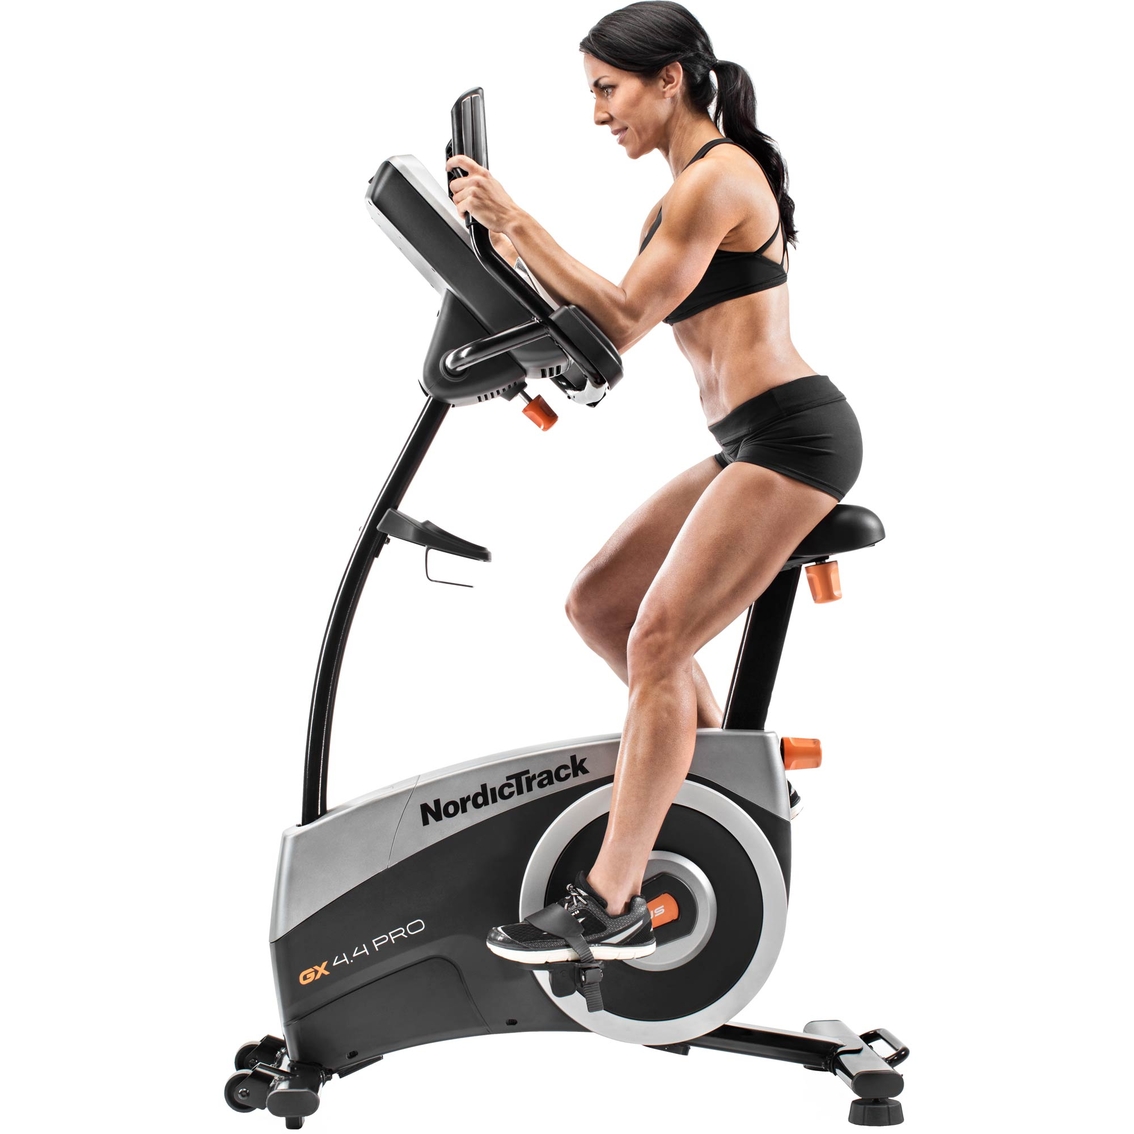 NordicTrack GX 4.4 Pro Exercise Bike - Image 3 of 4